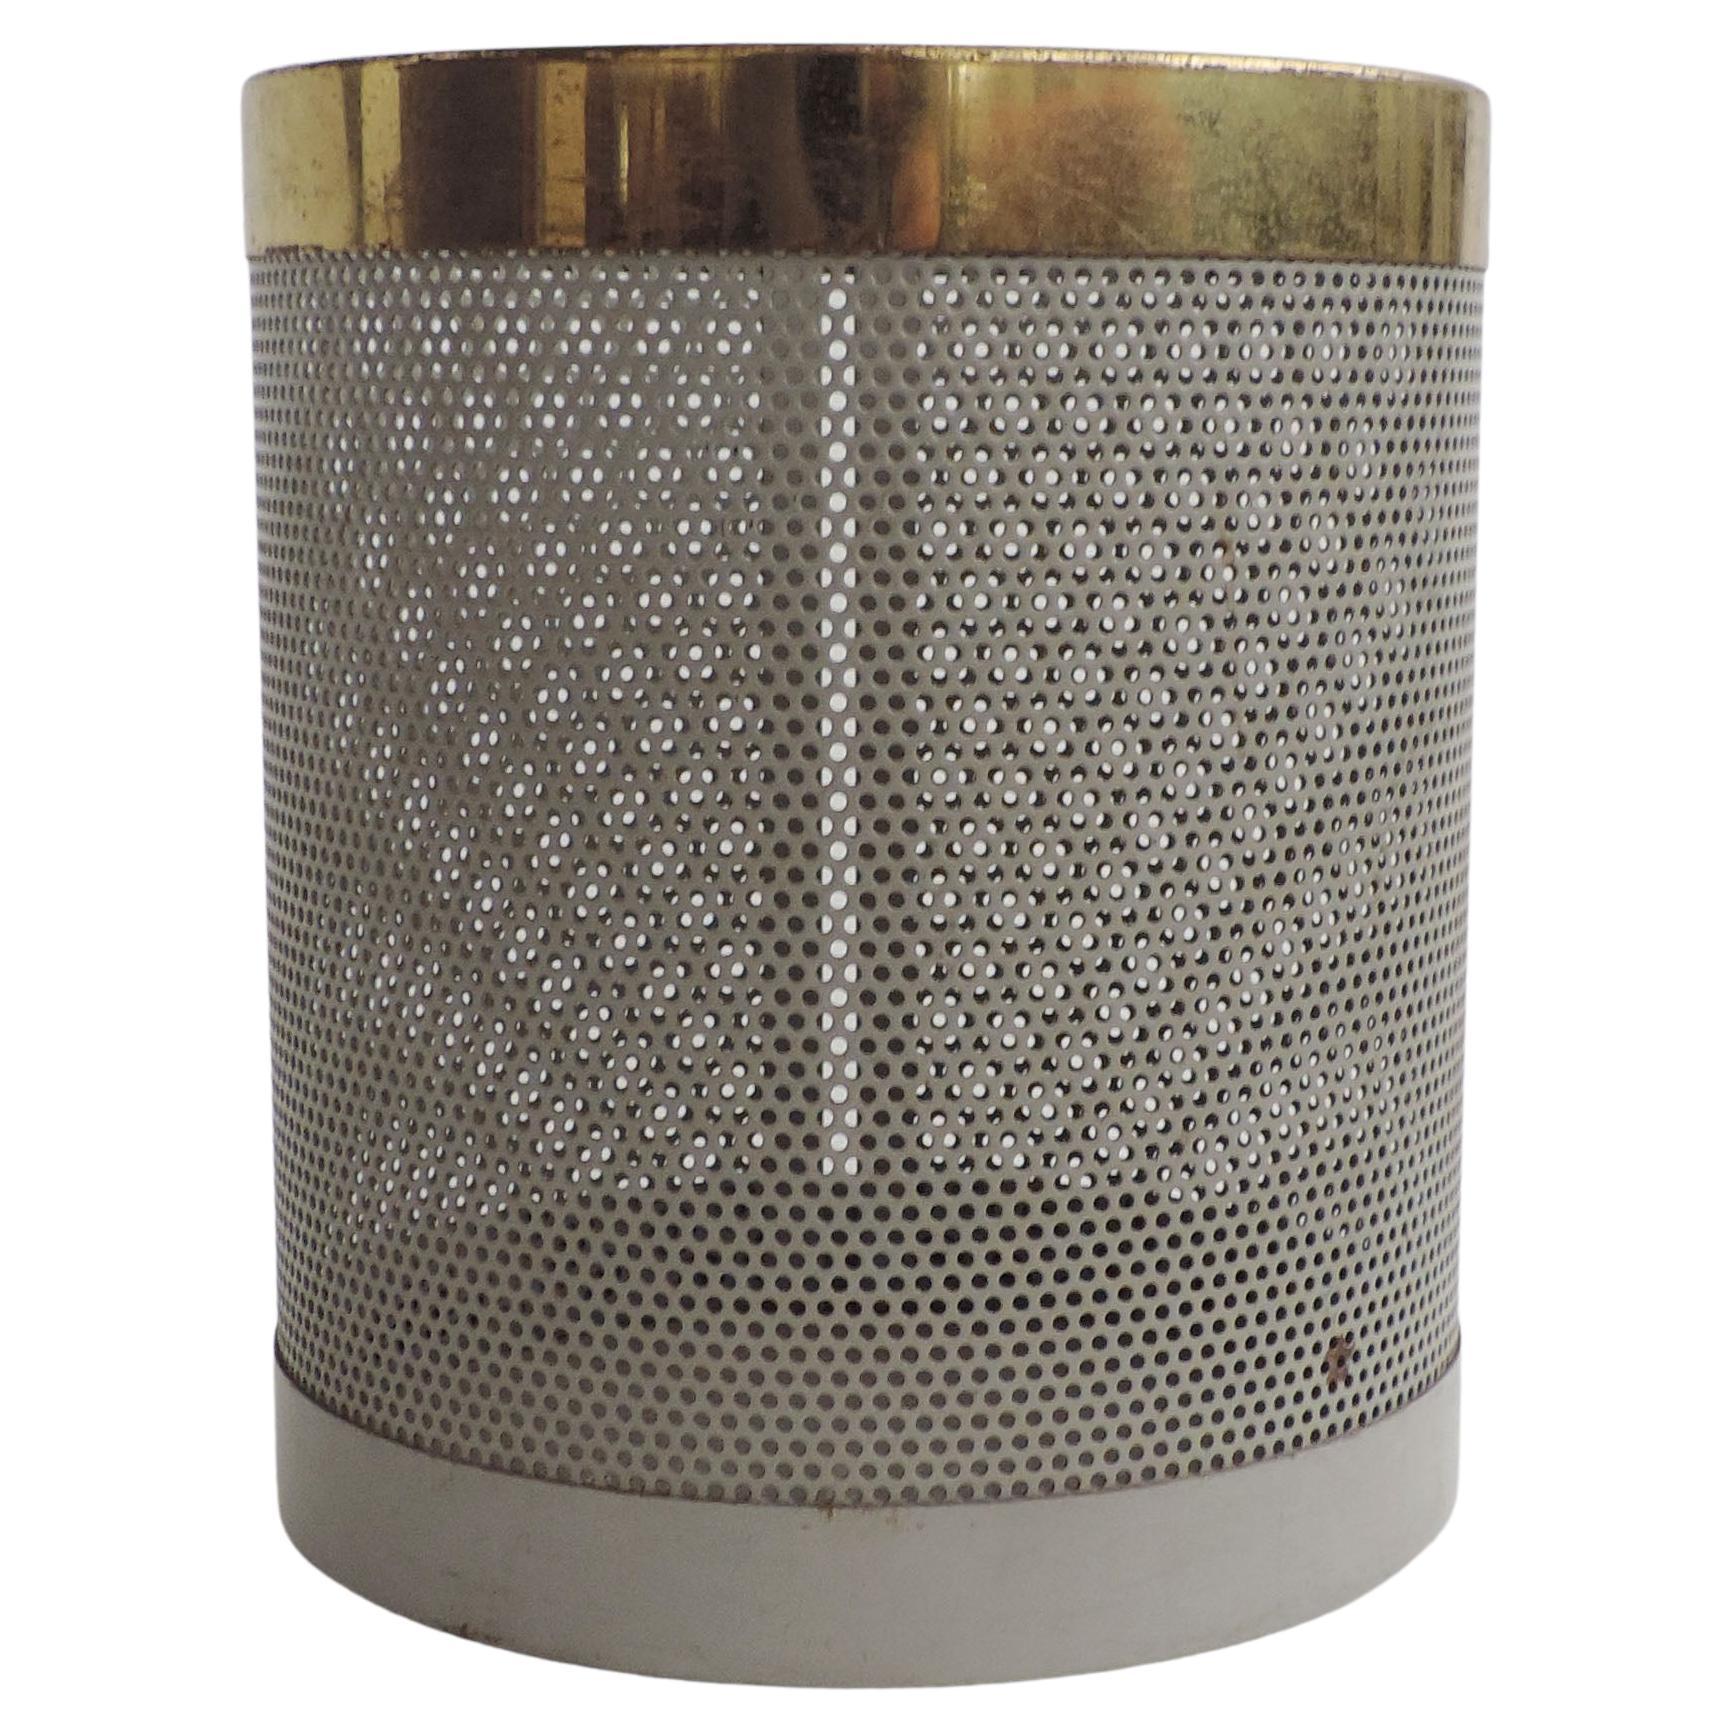 Modernist Perforated Italian Wastepaper Bin in Grey Metal and Brass, Italy 1960s For Sale